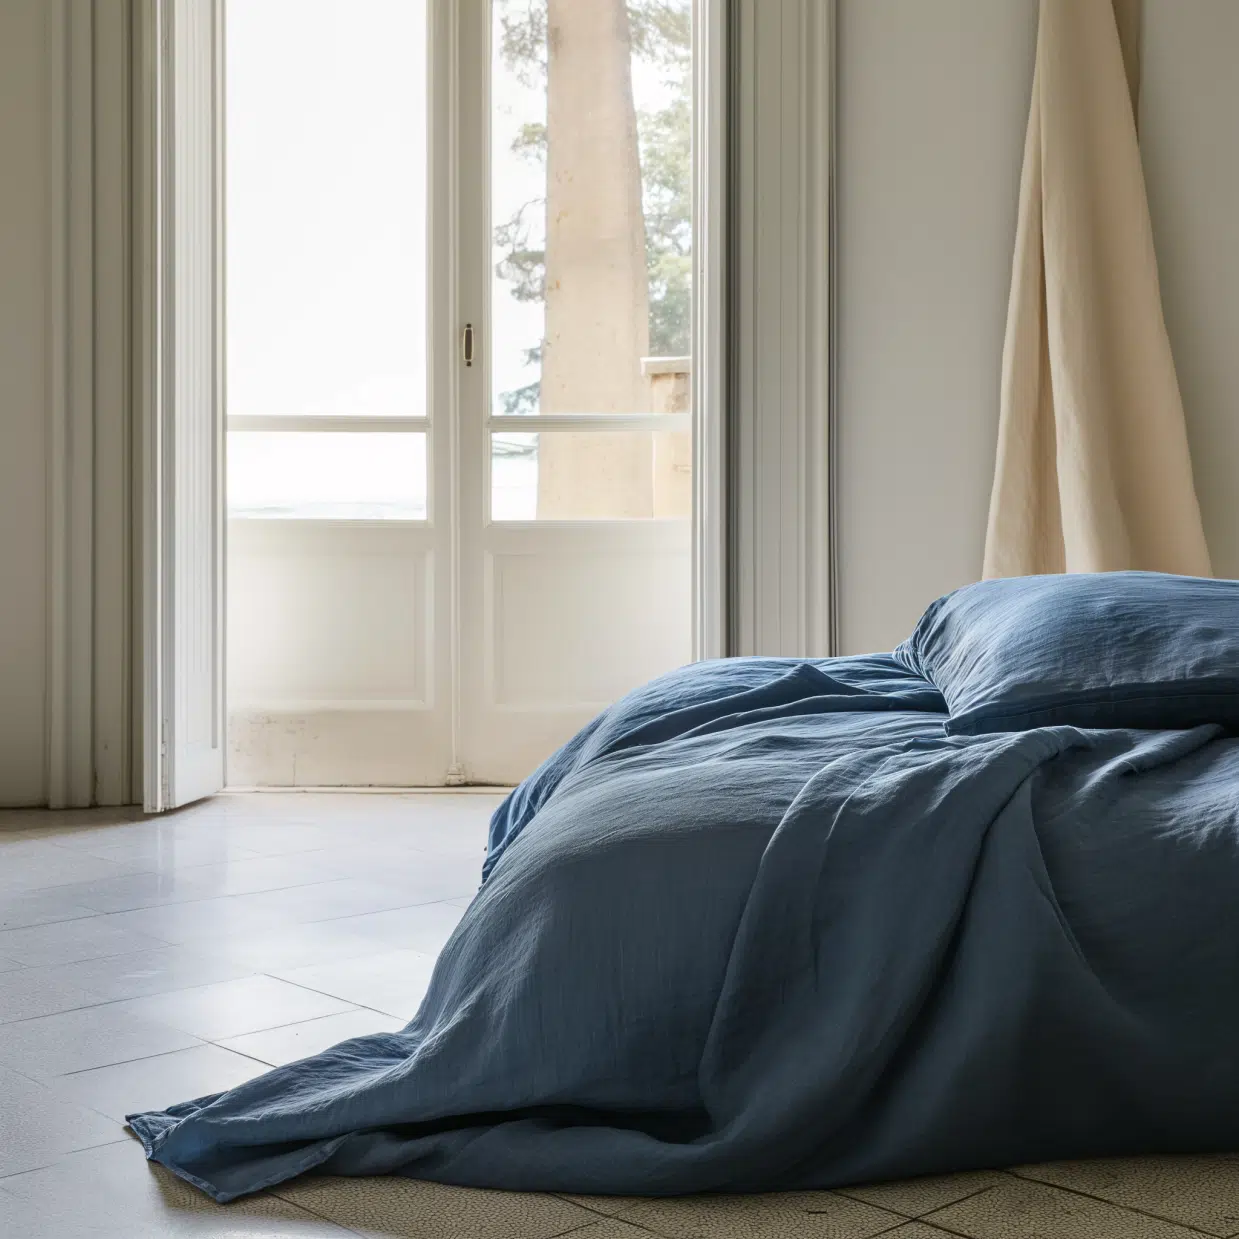 a bed covered in a blue duvet cover in a brightly lit bedroom